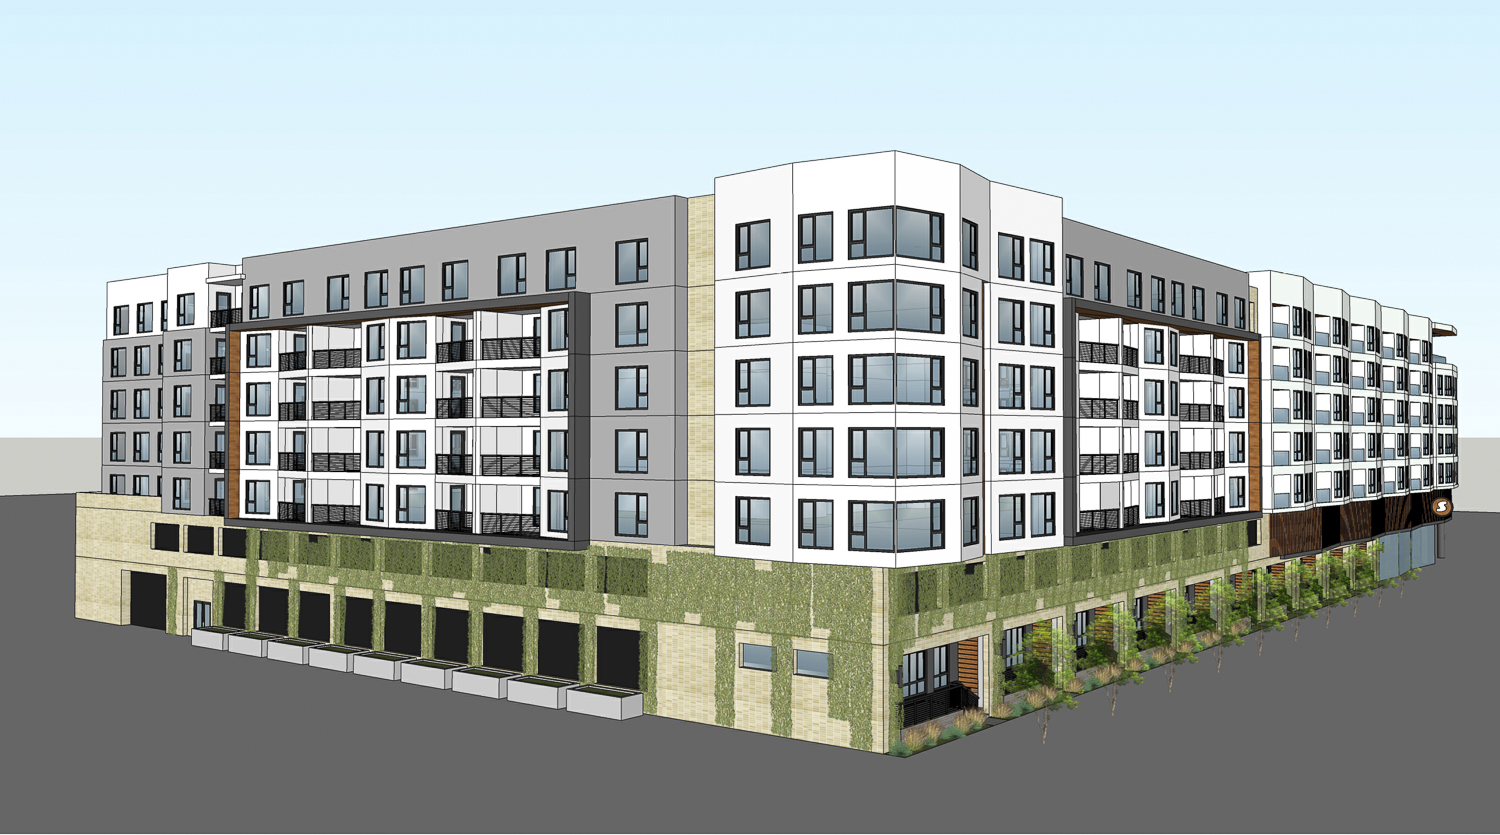 3606 El Camino Real, rendering by AO Architects